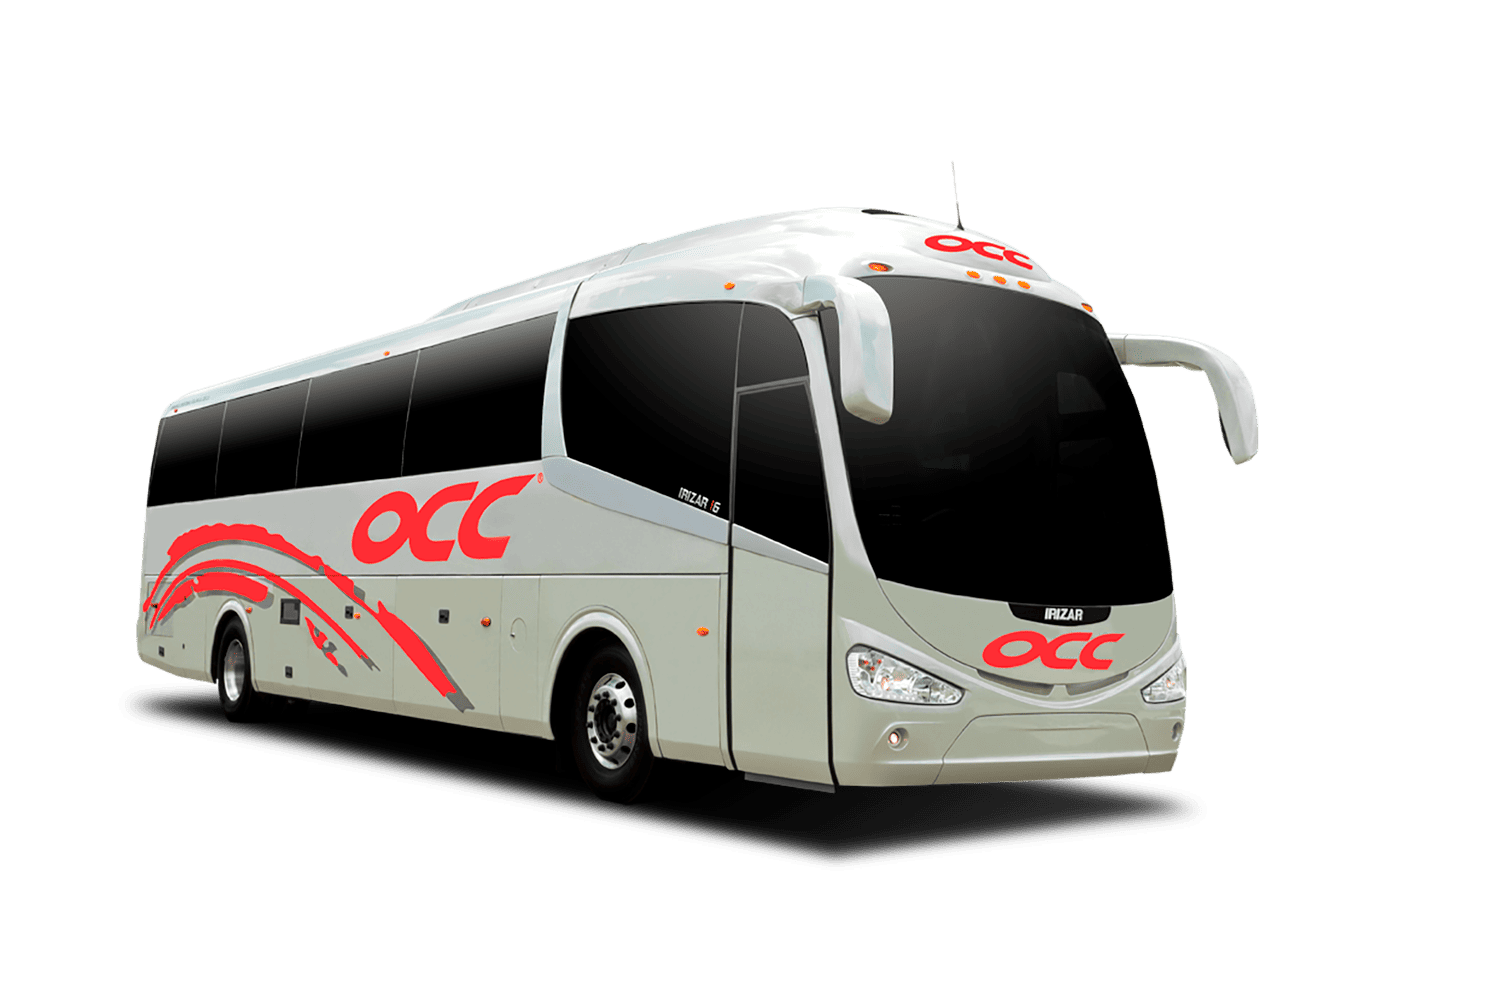 How To Get From Cancun To Palenque By Bus - All Possible Ways, cheapest way from Cancun to Palenque, Cancun to Palenque, ado bus from Cancun to Palenque, occ bus from Cancun to Palenque, AU autobuses unidos from Cancun to Palenque, shared van from Cancun to Palenque, Colectivo from Cancun to Palenque, Uber from Cancun to Palenque, taxi from Cancun to Palenque